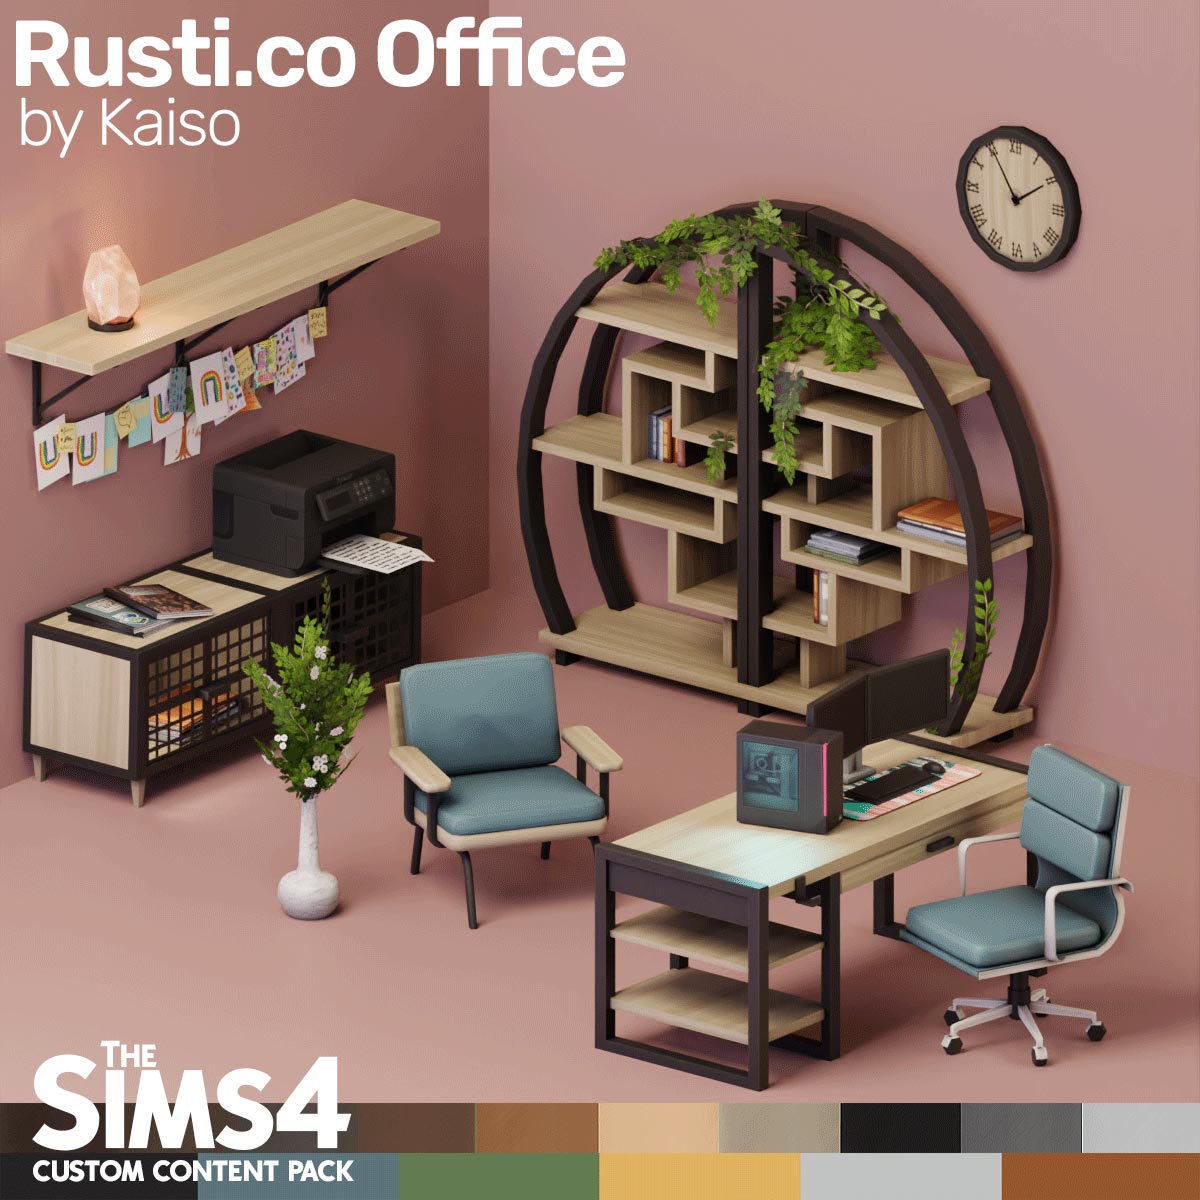 The Sims 4 Rustic Office Set CC